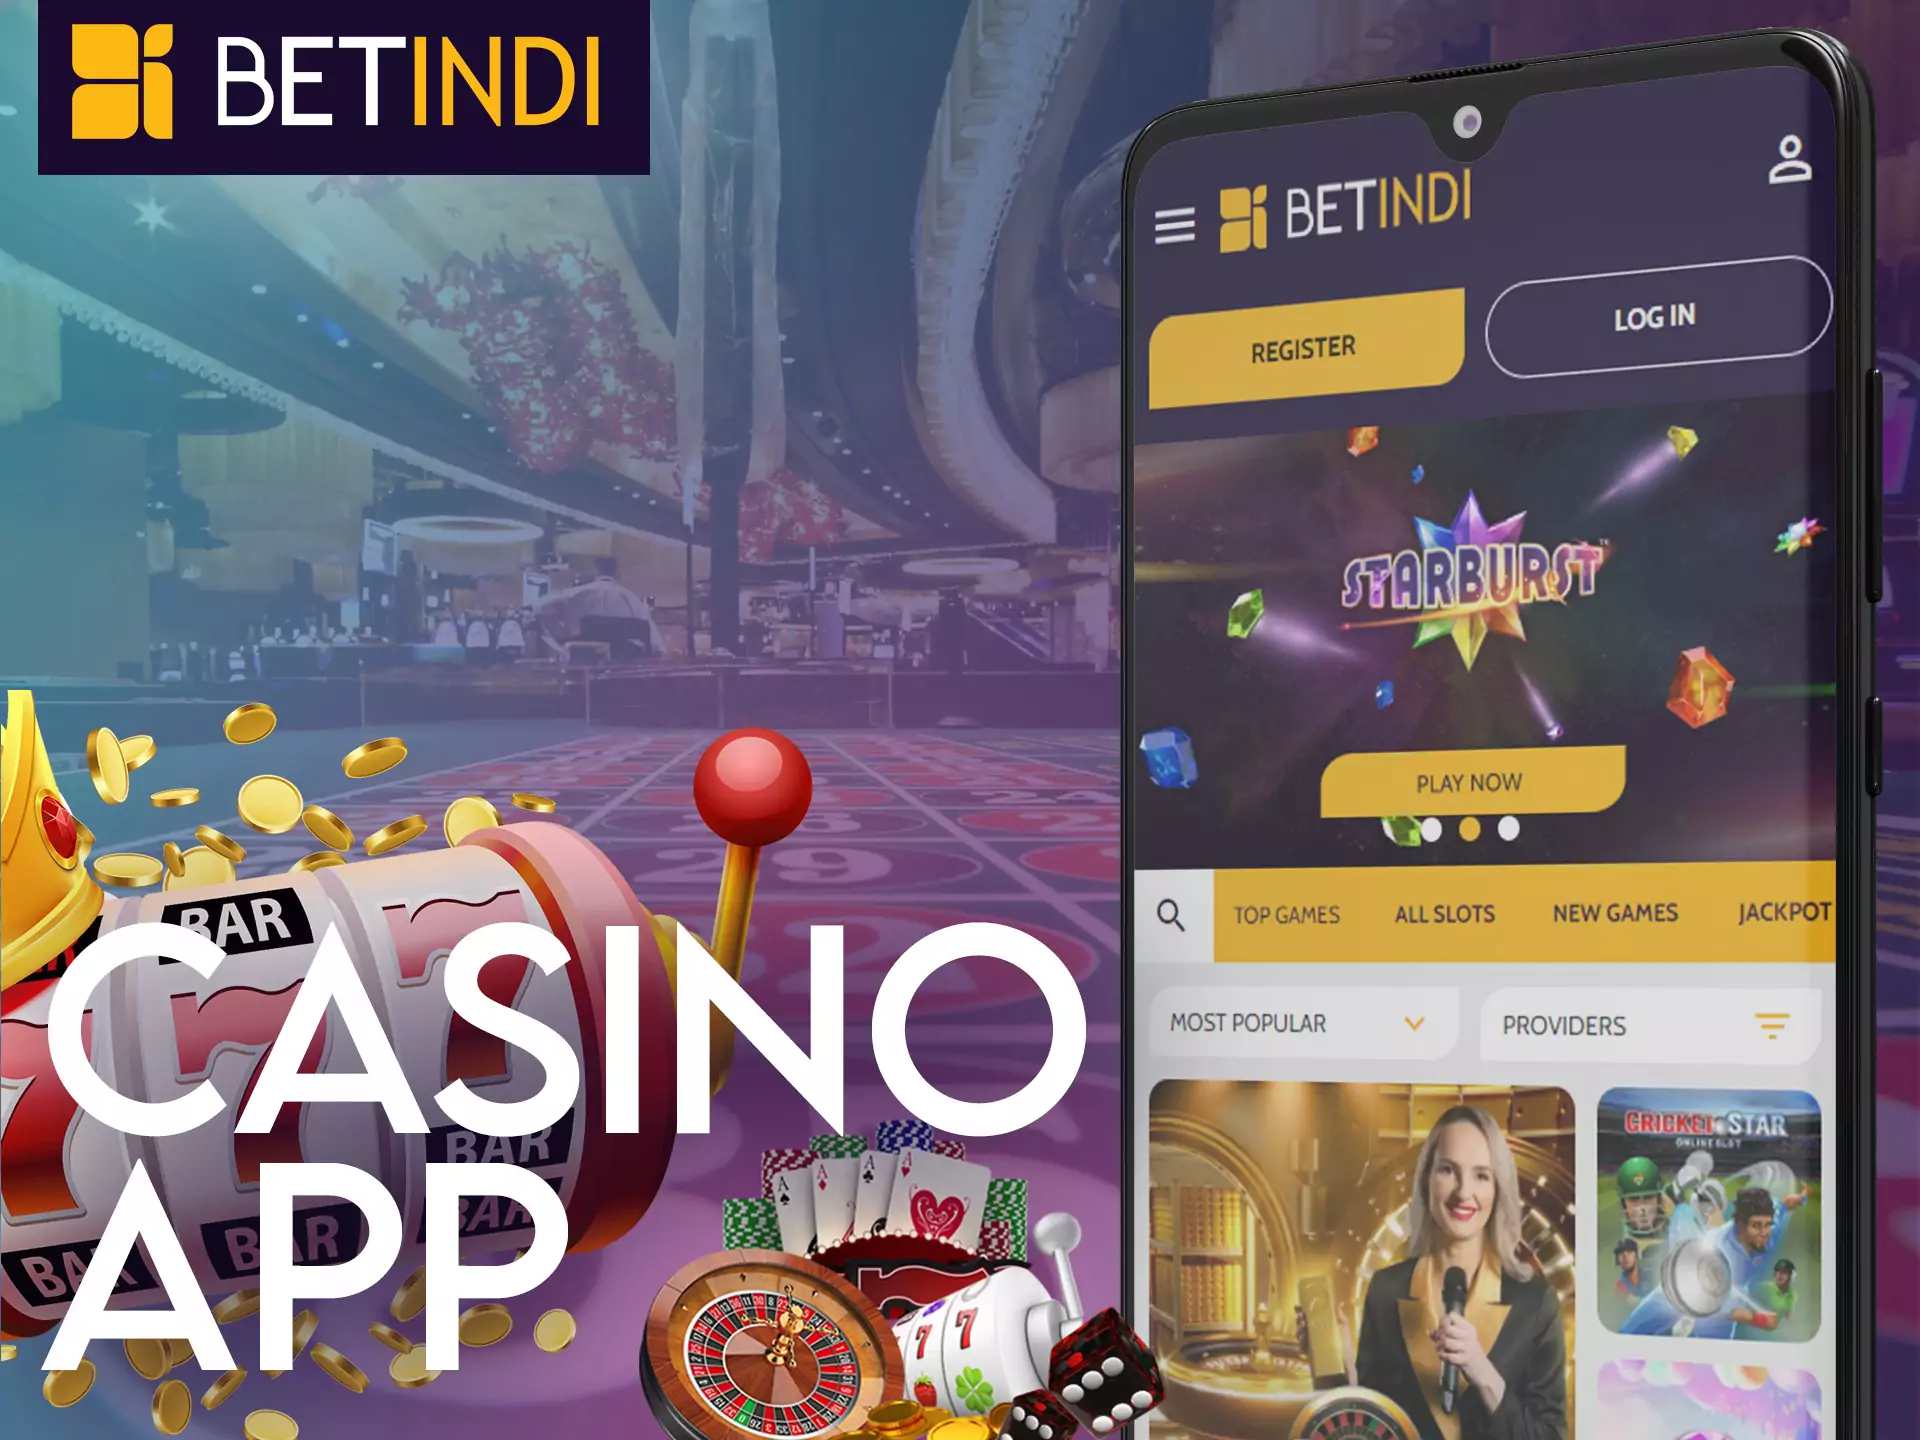 Try the convenient and functional Betindi casino app.